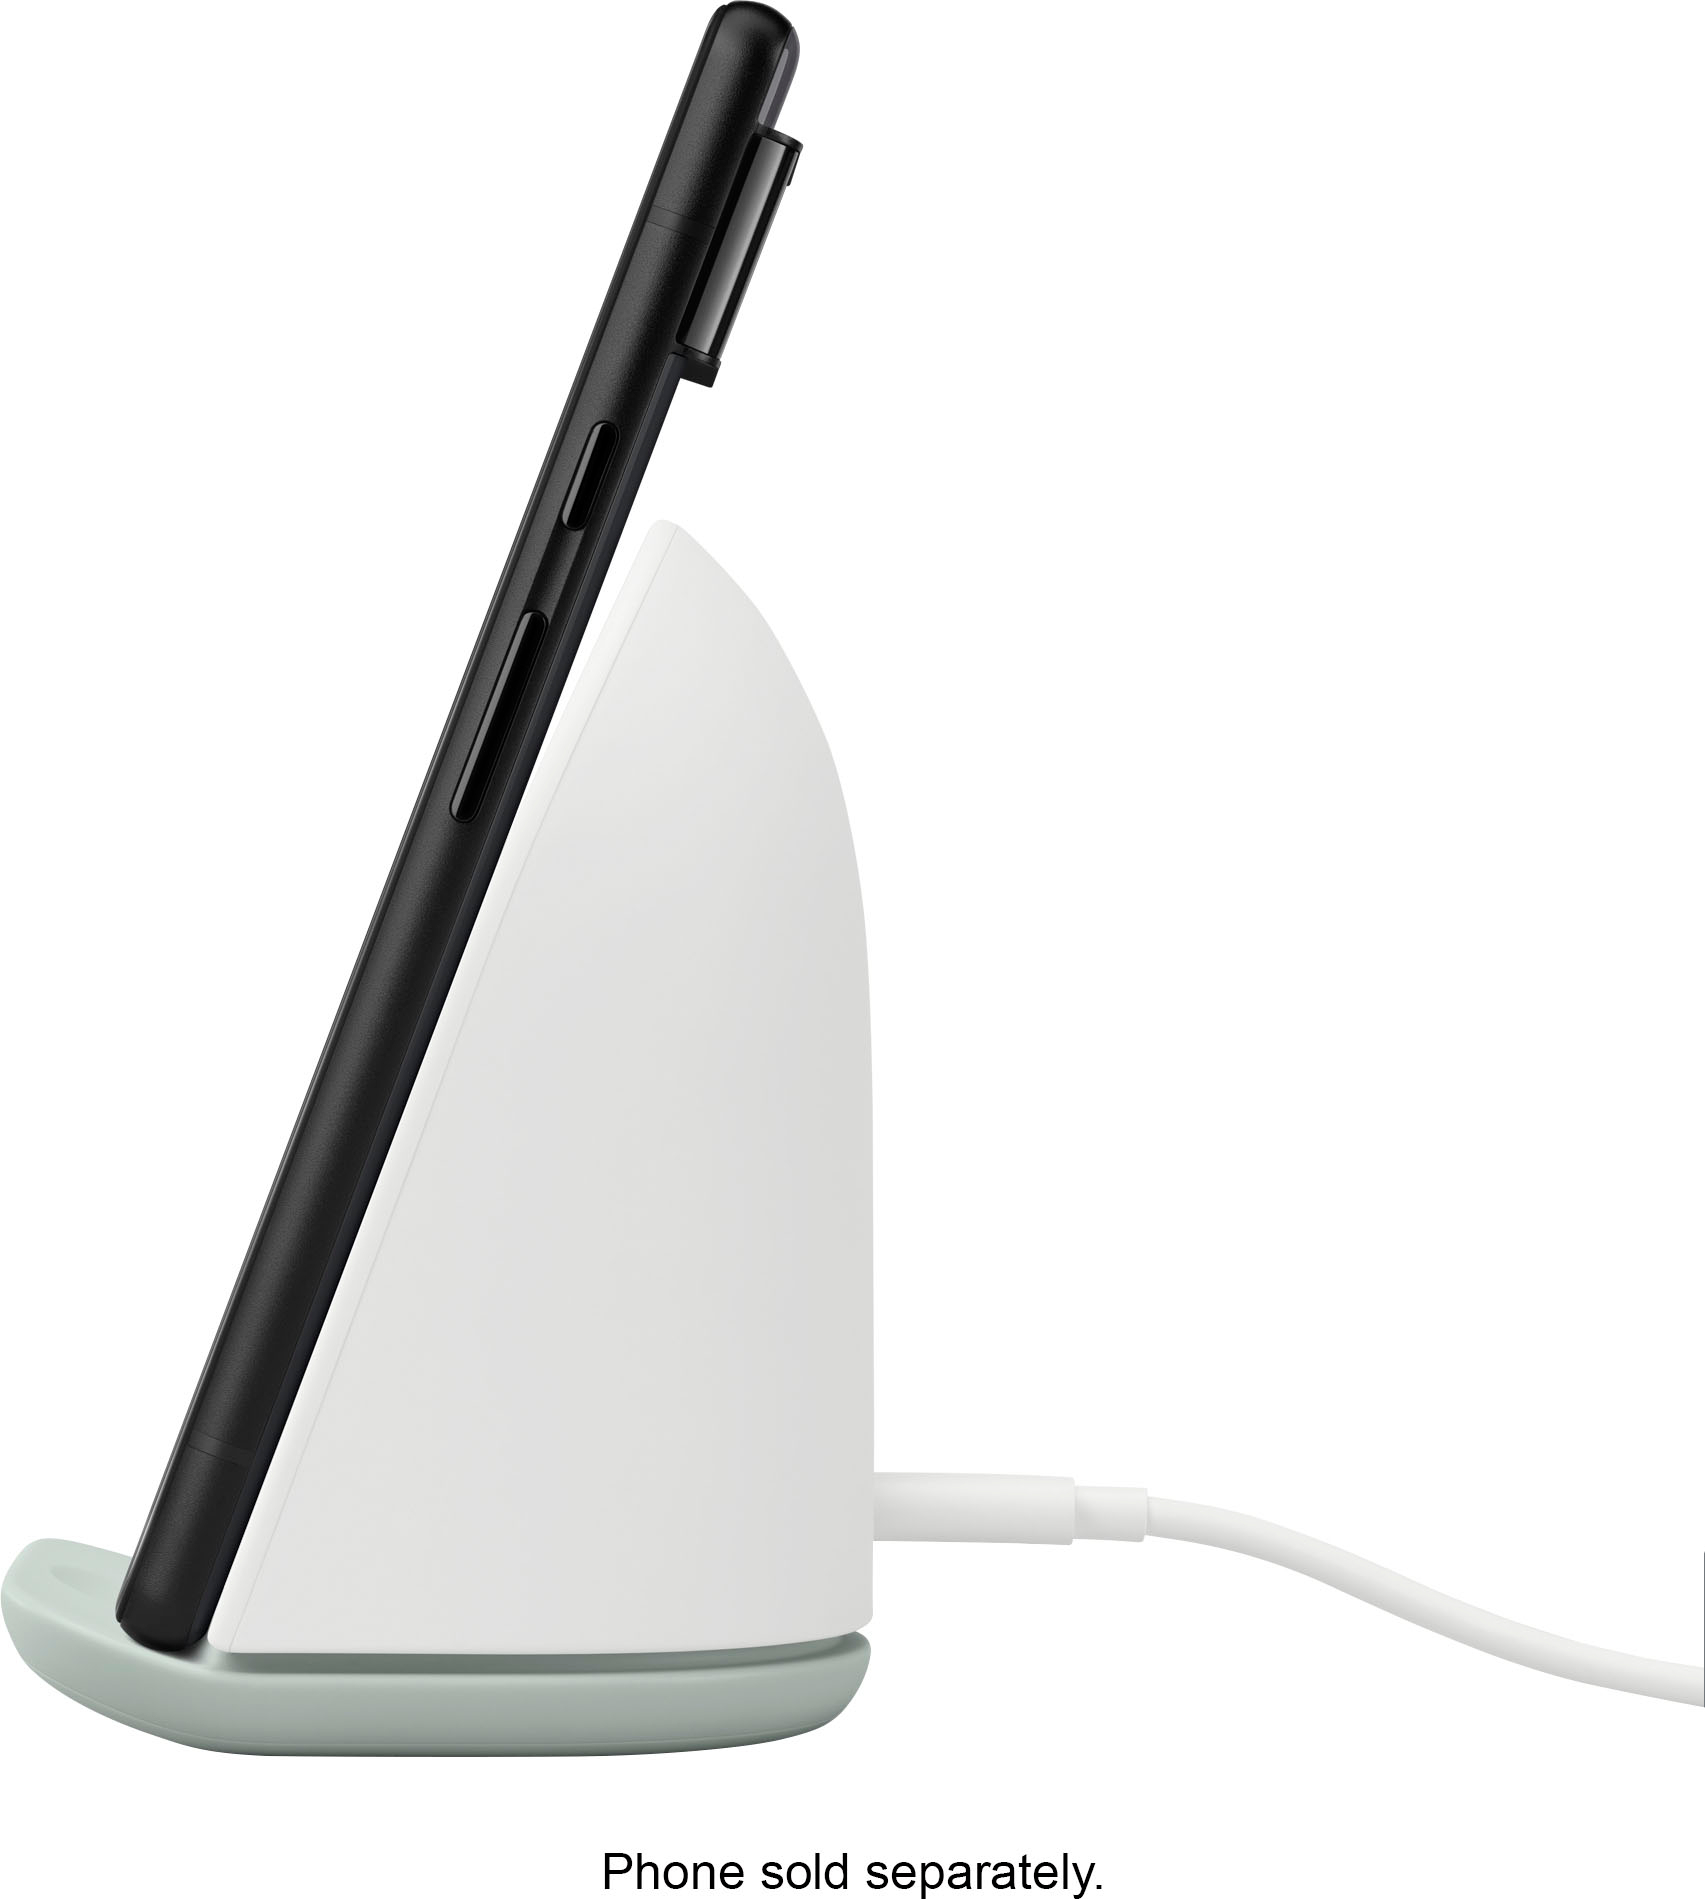 Google Pixel Stand (2nd Gen) - Wireless Charger - Fast Charging Pixel Phone  Charger - Thai Nexus Man : A Google Nexus, Motorola, Accessories and  Gadgets Store. : Inspired by LnwShop.com